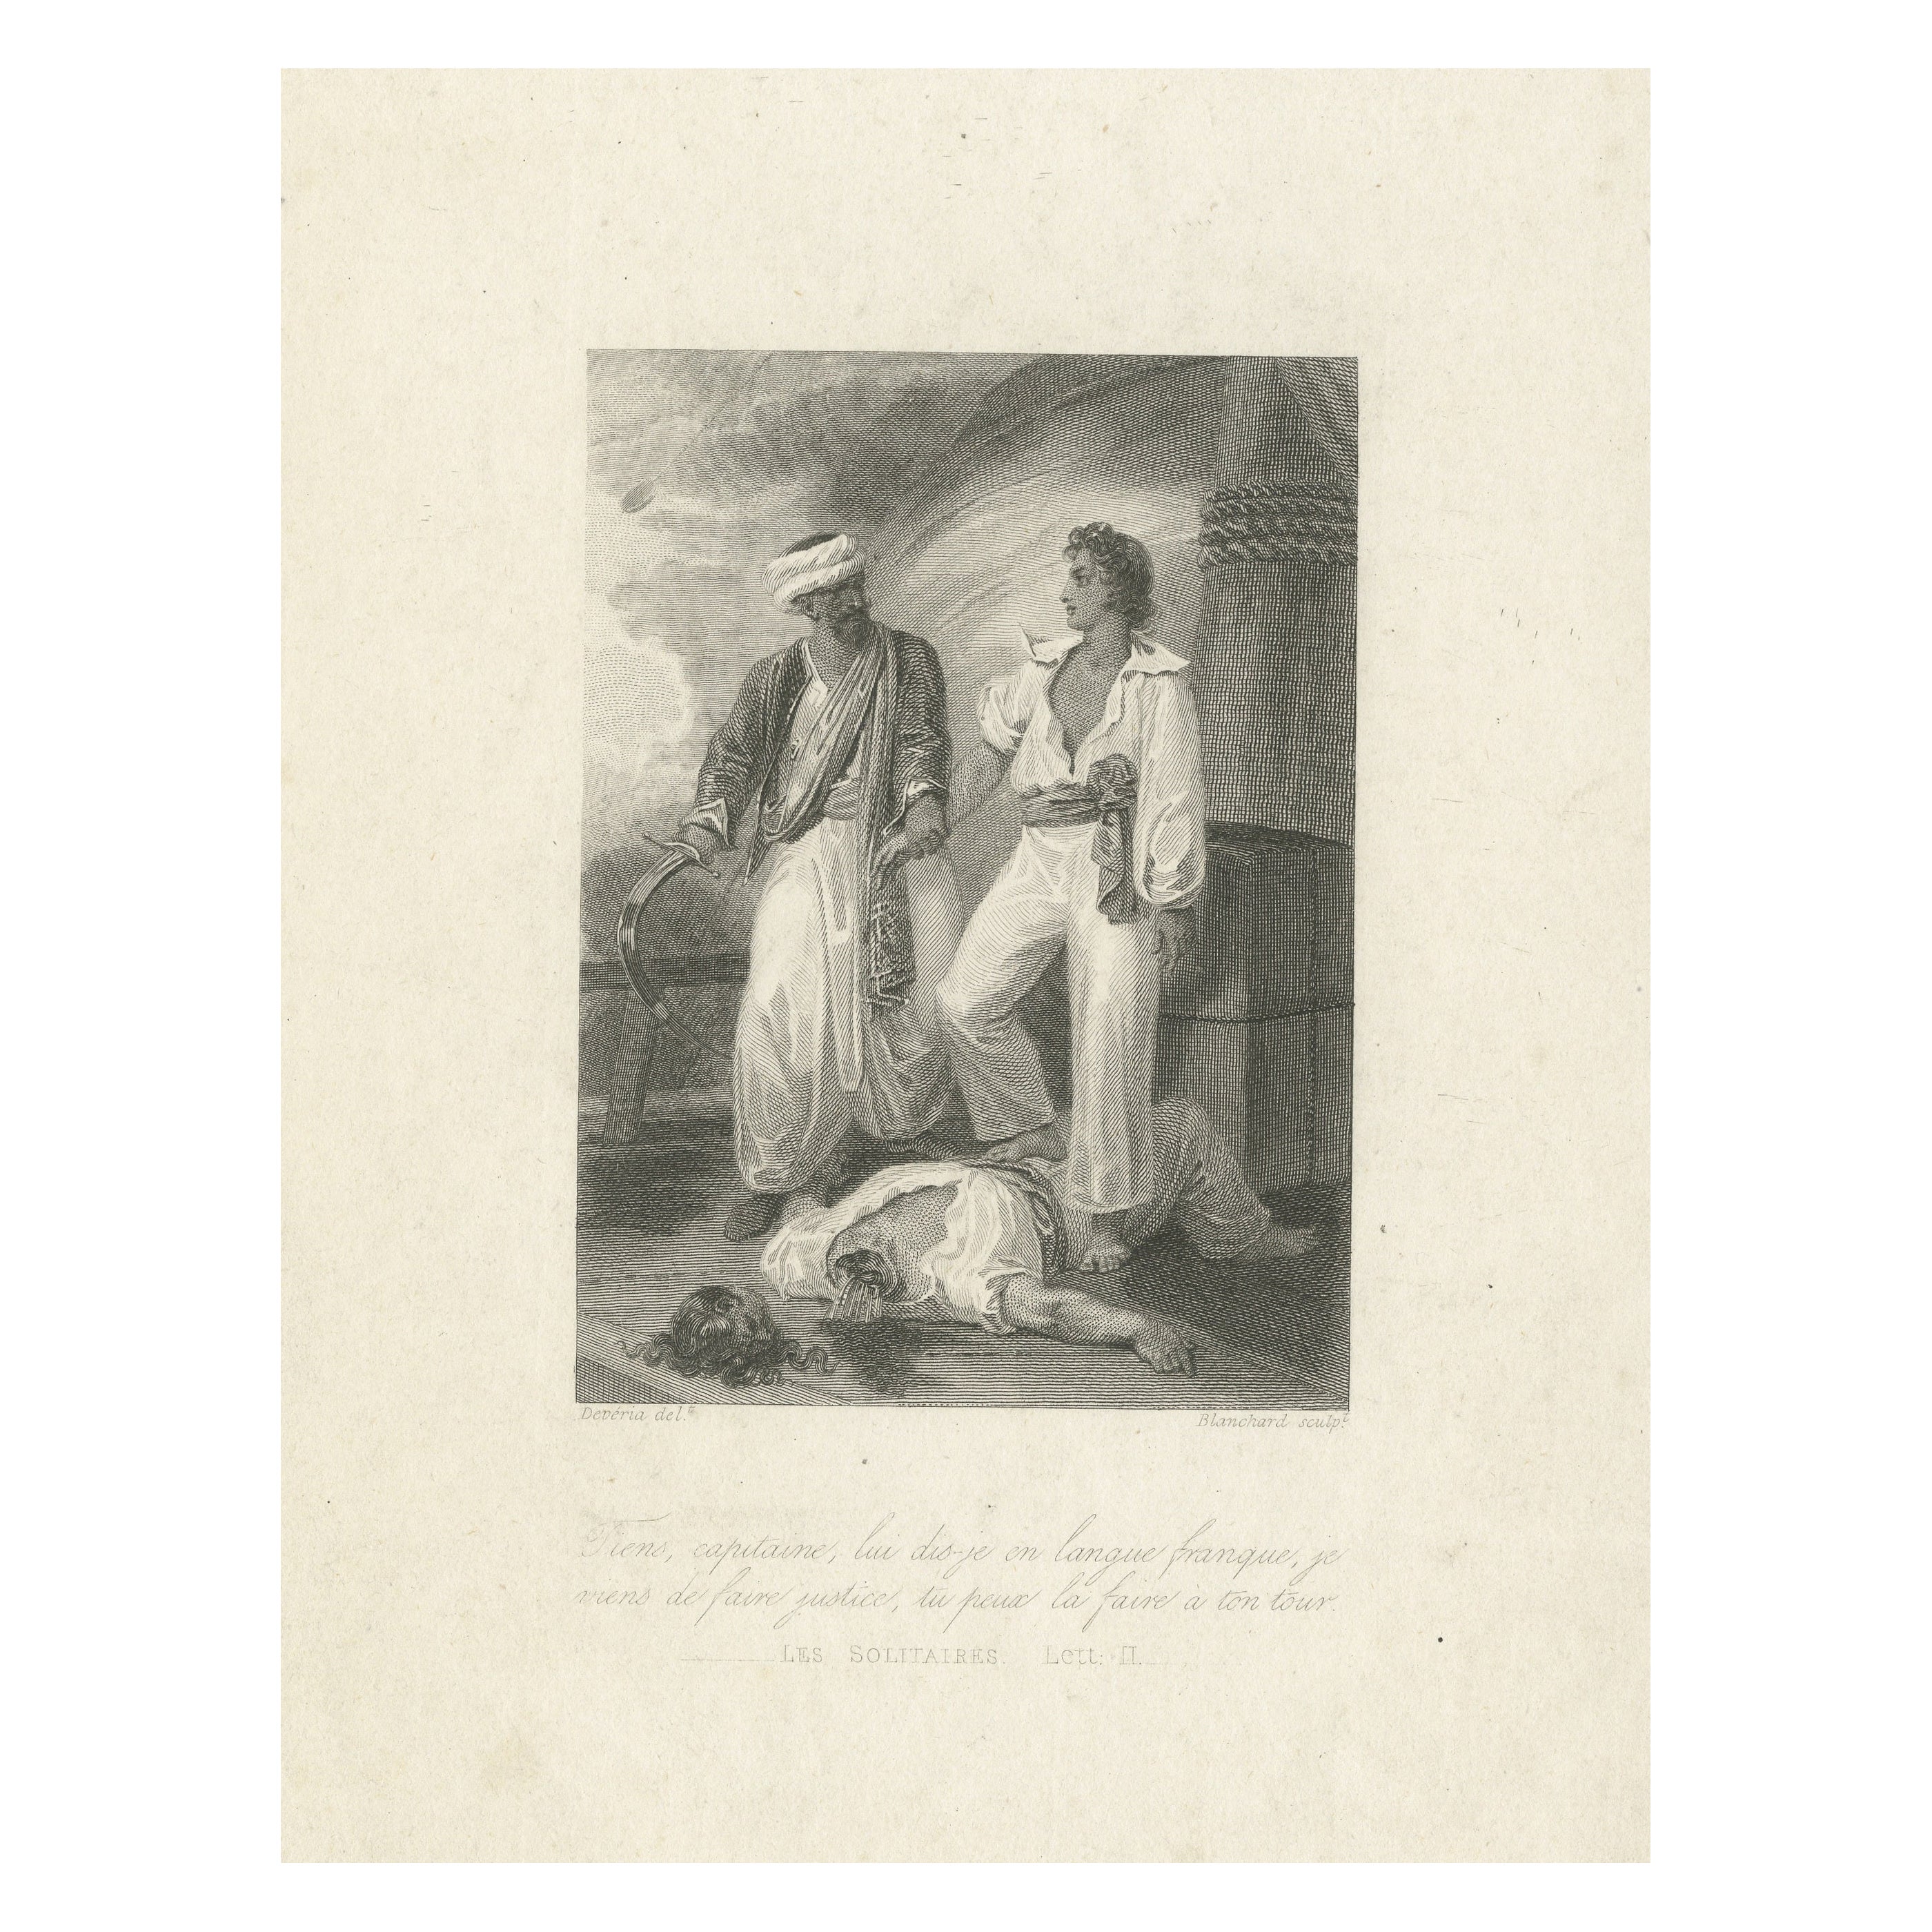 Antique Print with a Decapitation Scene of 'Les Solitaires' by Rousseau For Sale